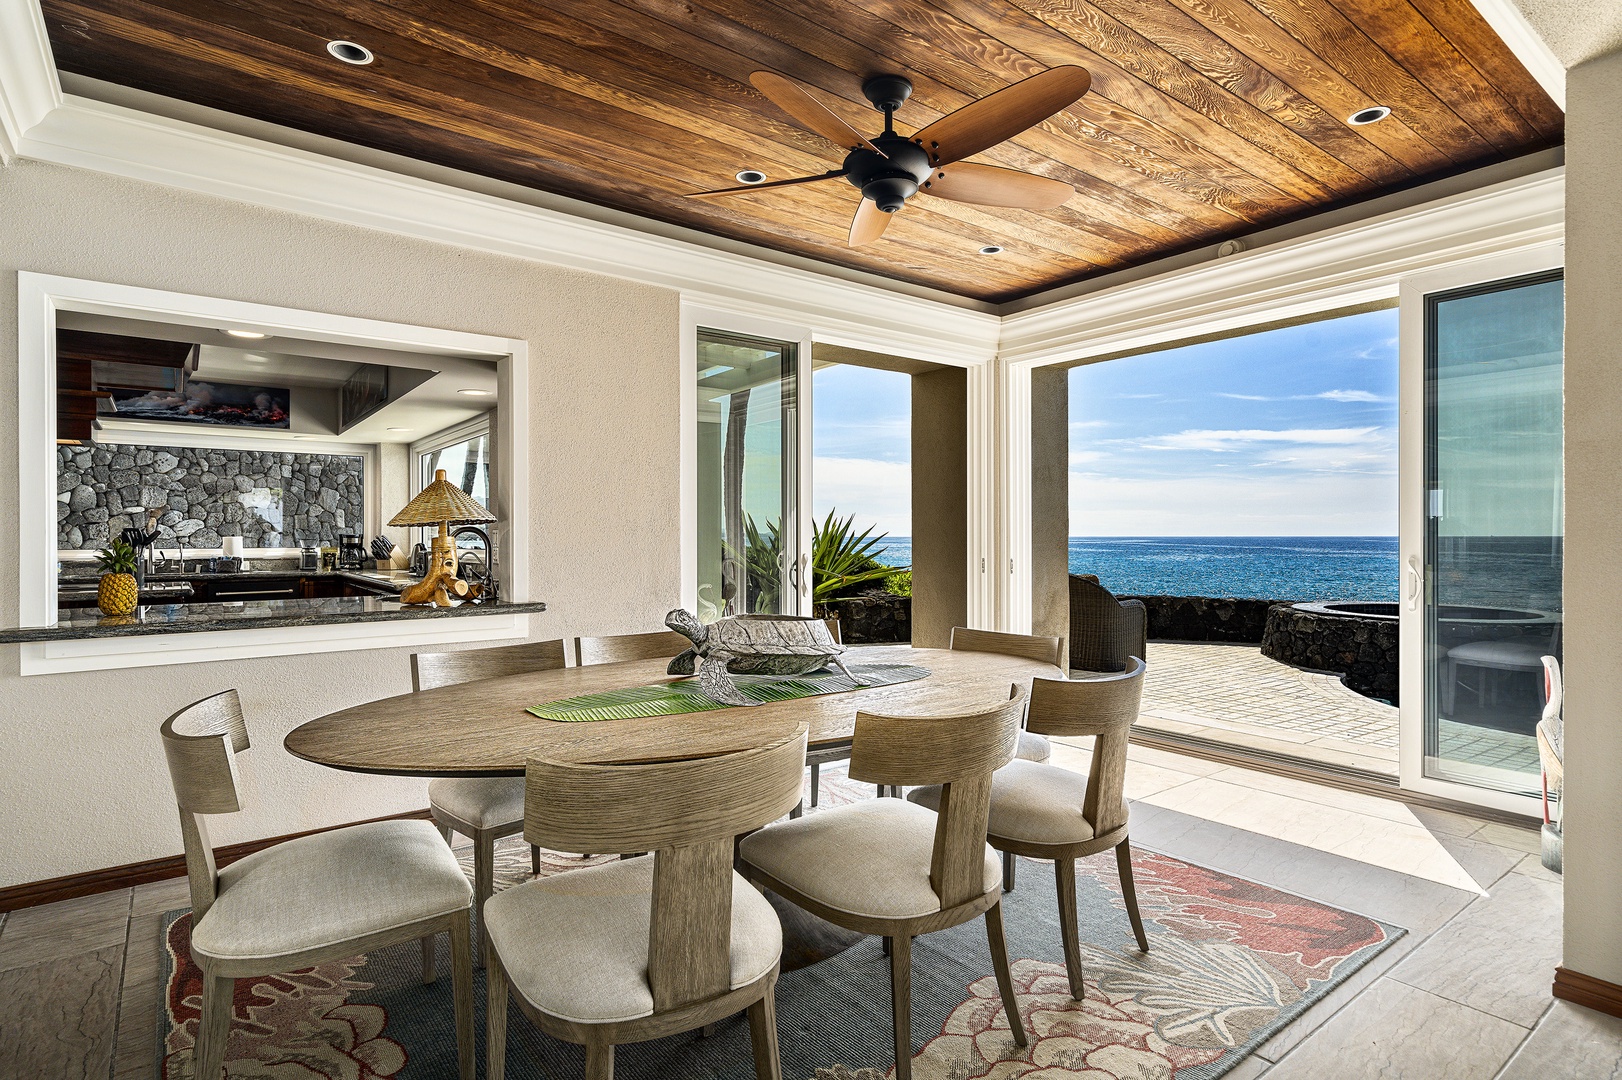 Kailua Kona Vacation Rentals, Ali'i Point #9 - Indoor dining with views over the infinity edge into the ocean!